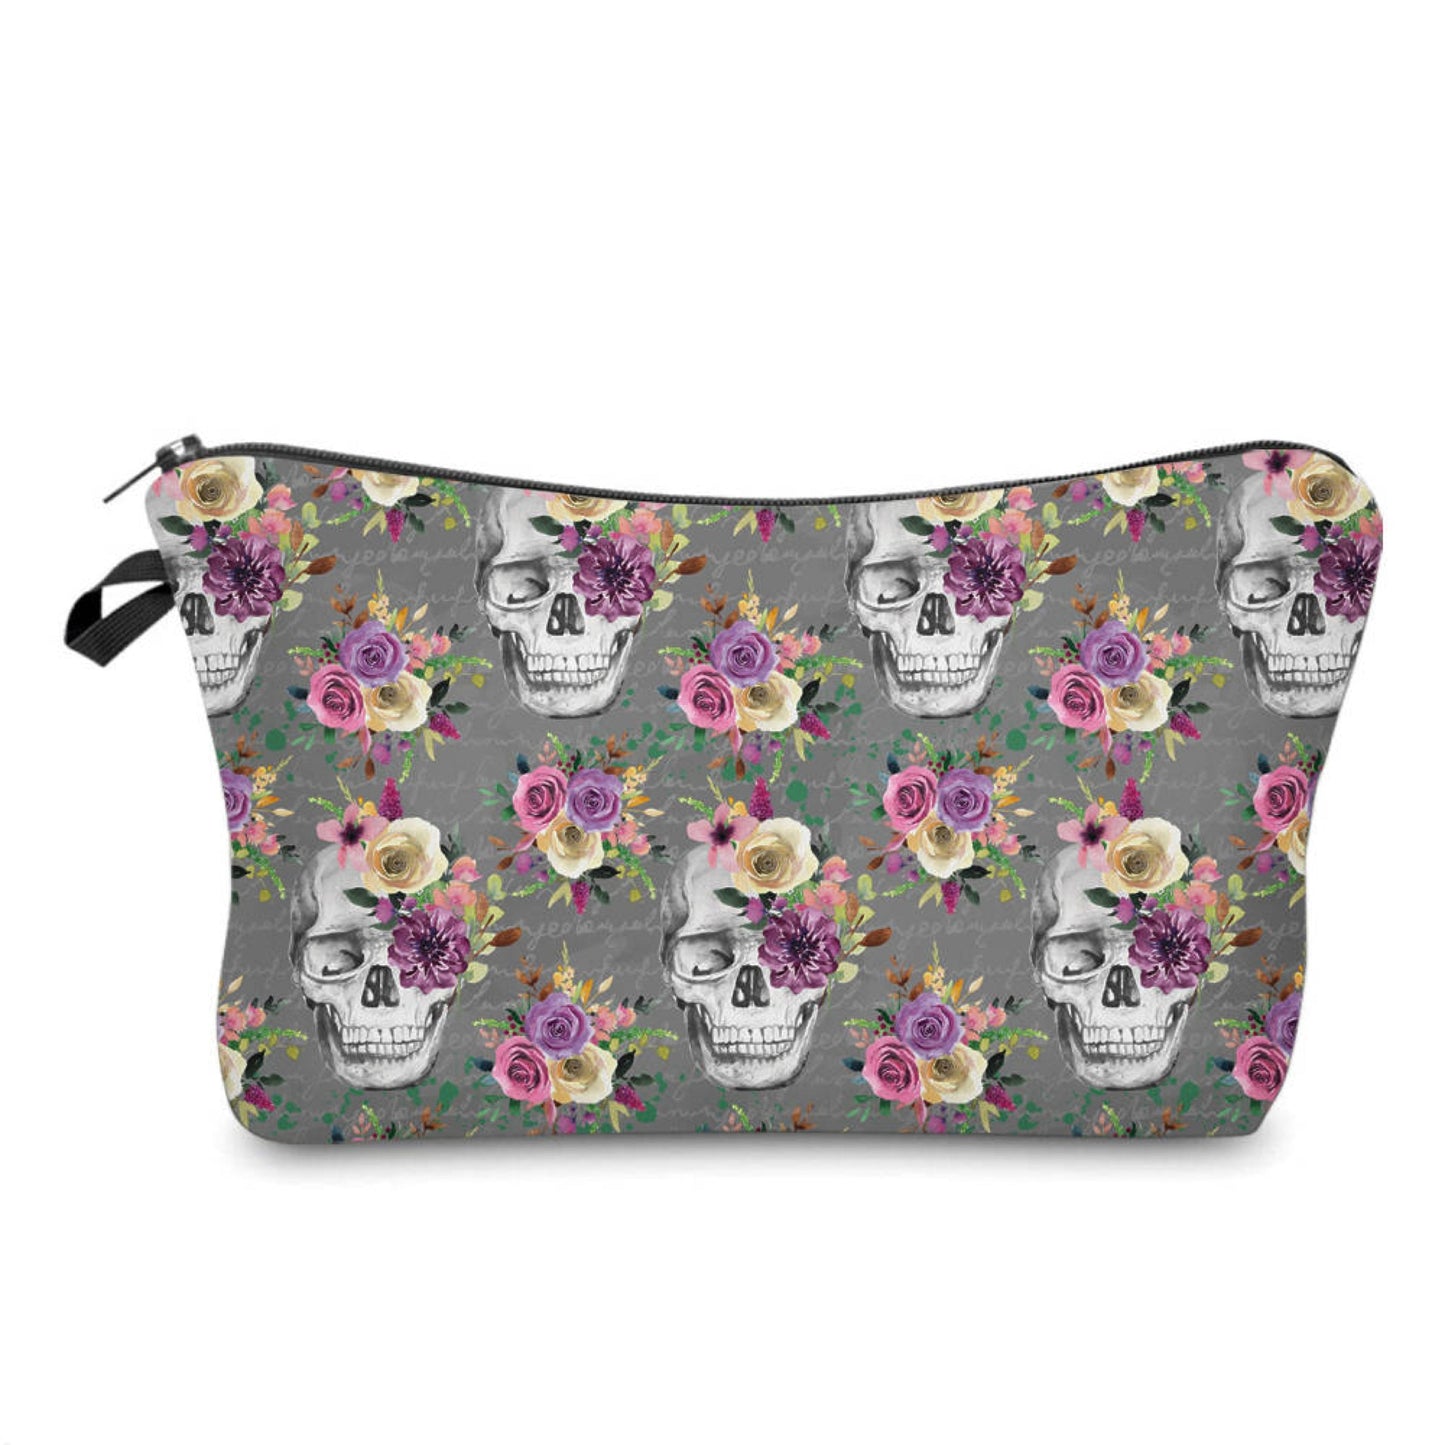 Pouch - Skull Floral on Grey